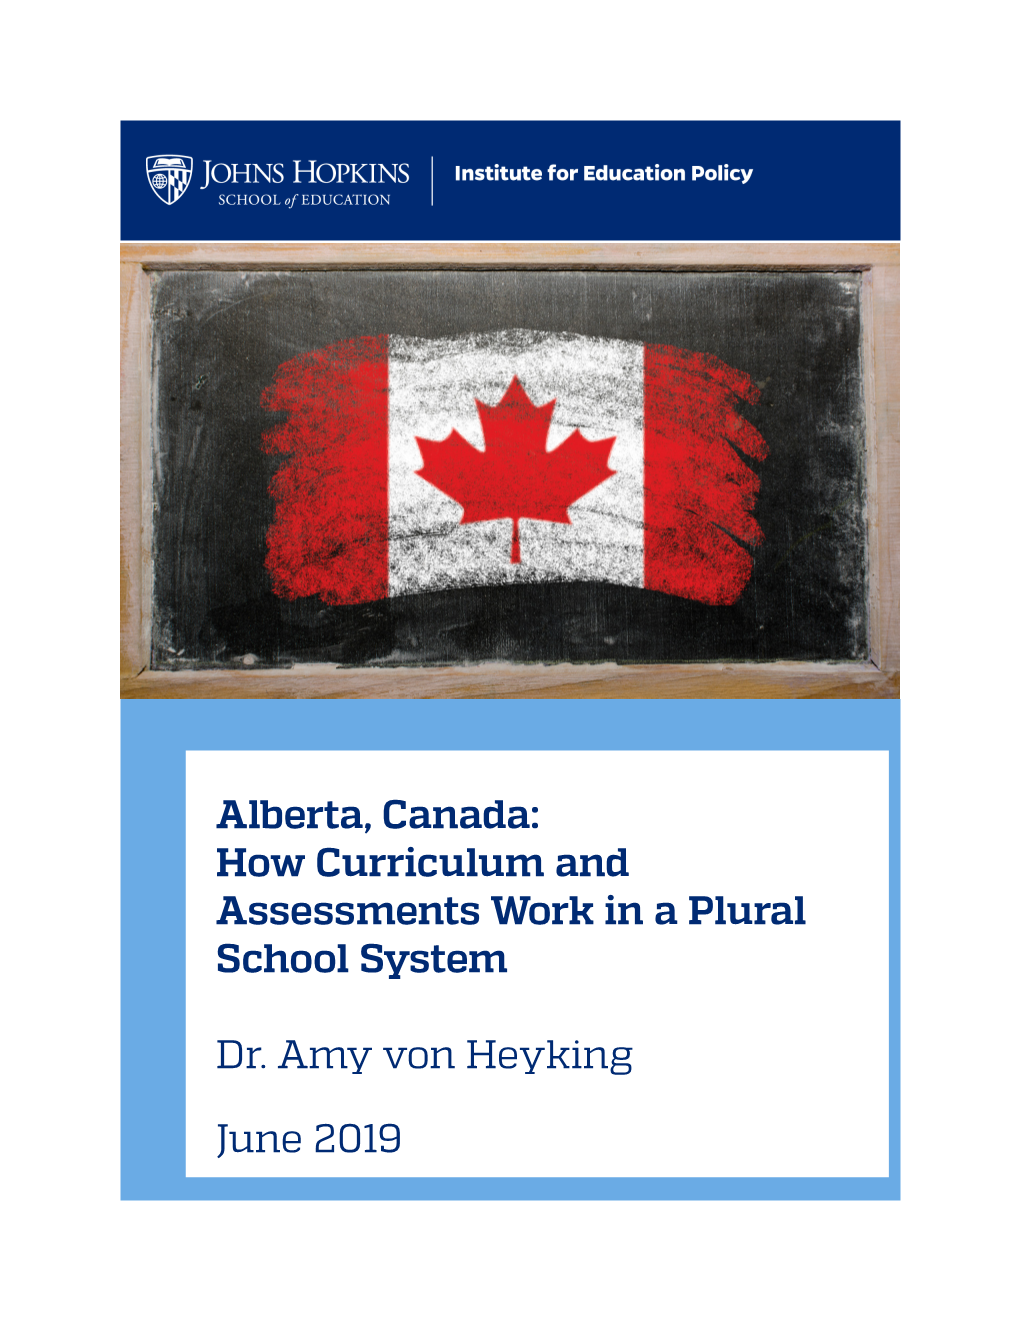 Alberta, Canada: How Curriculum and Assessments Work in a Plural School System